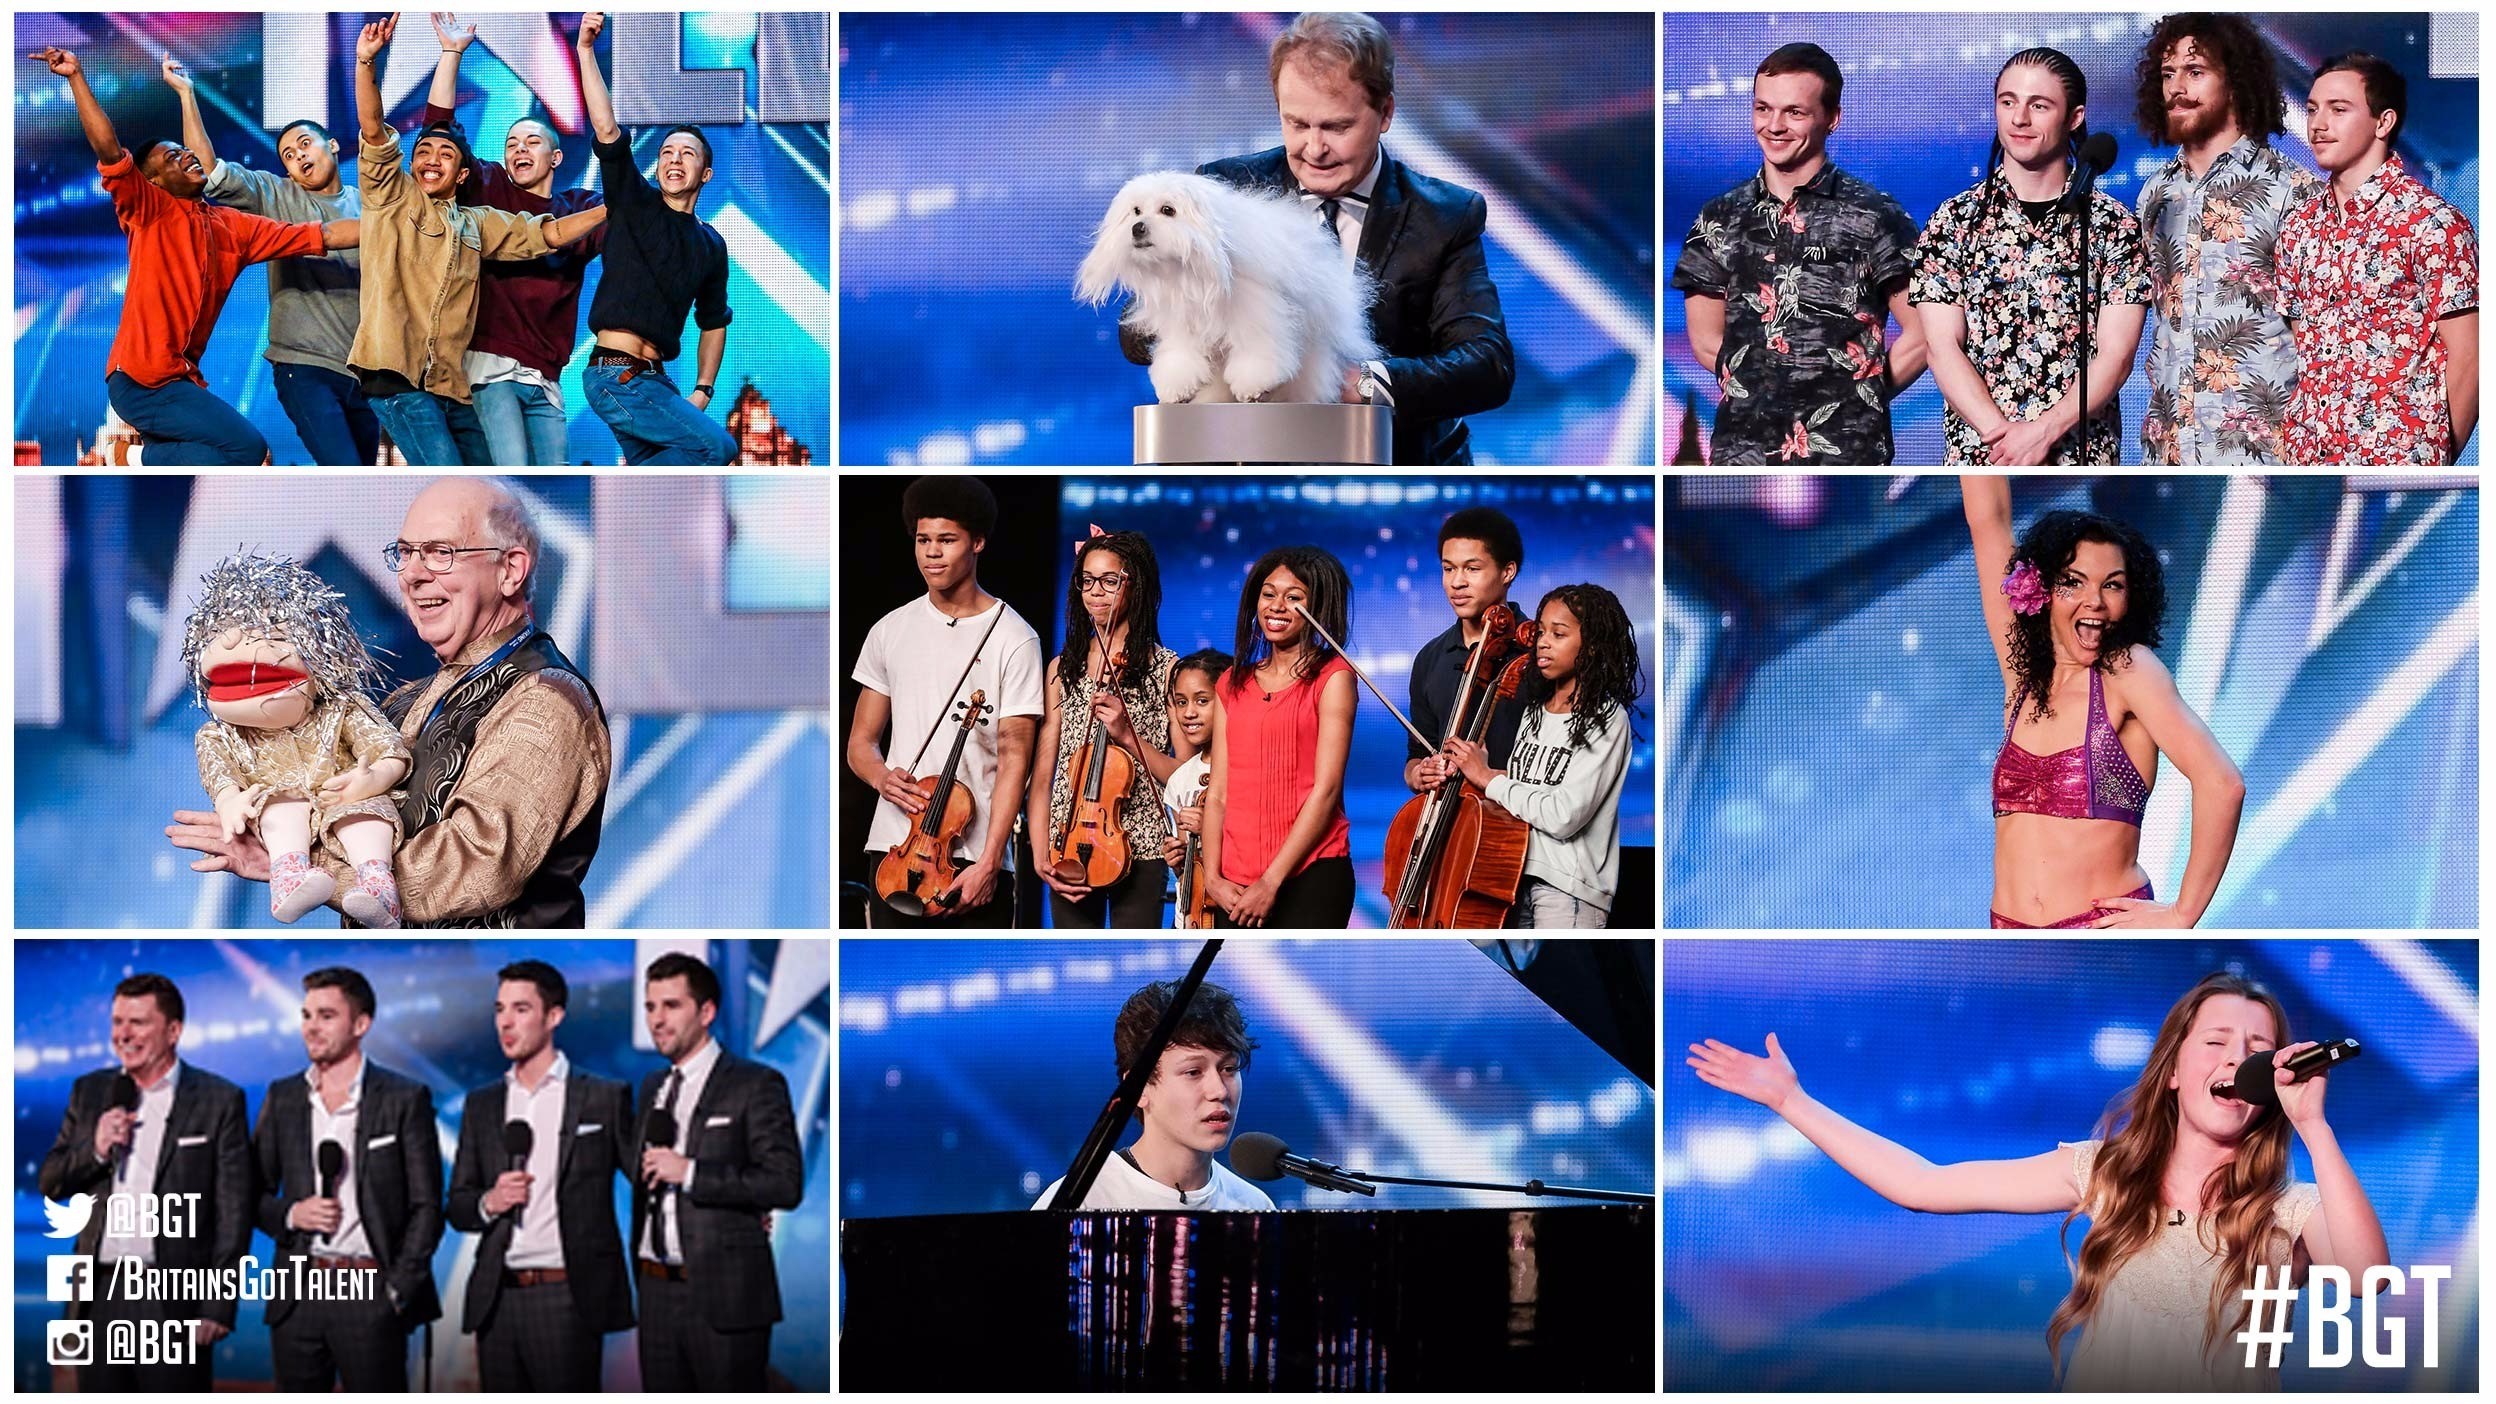 Meet the awesome acts performing in tonight's live semifinal Britain